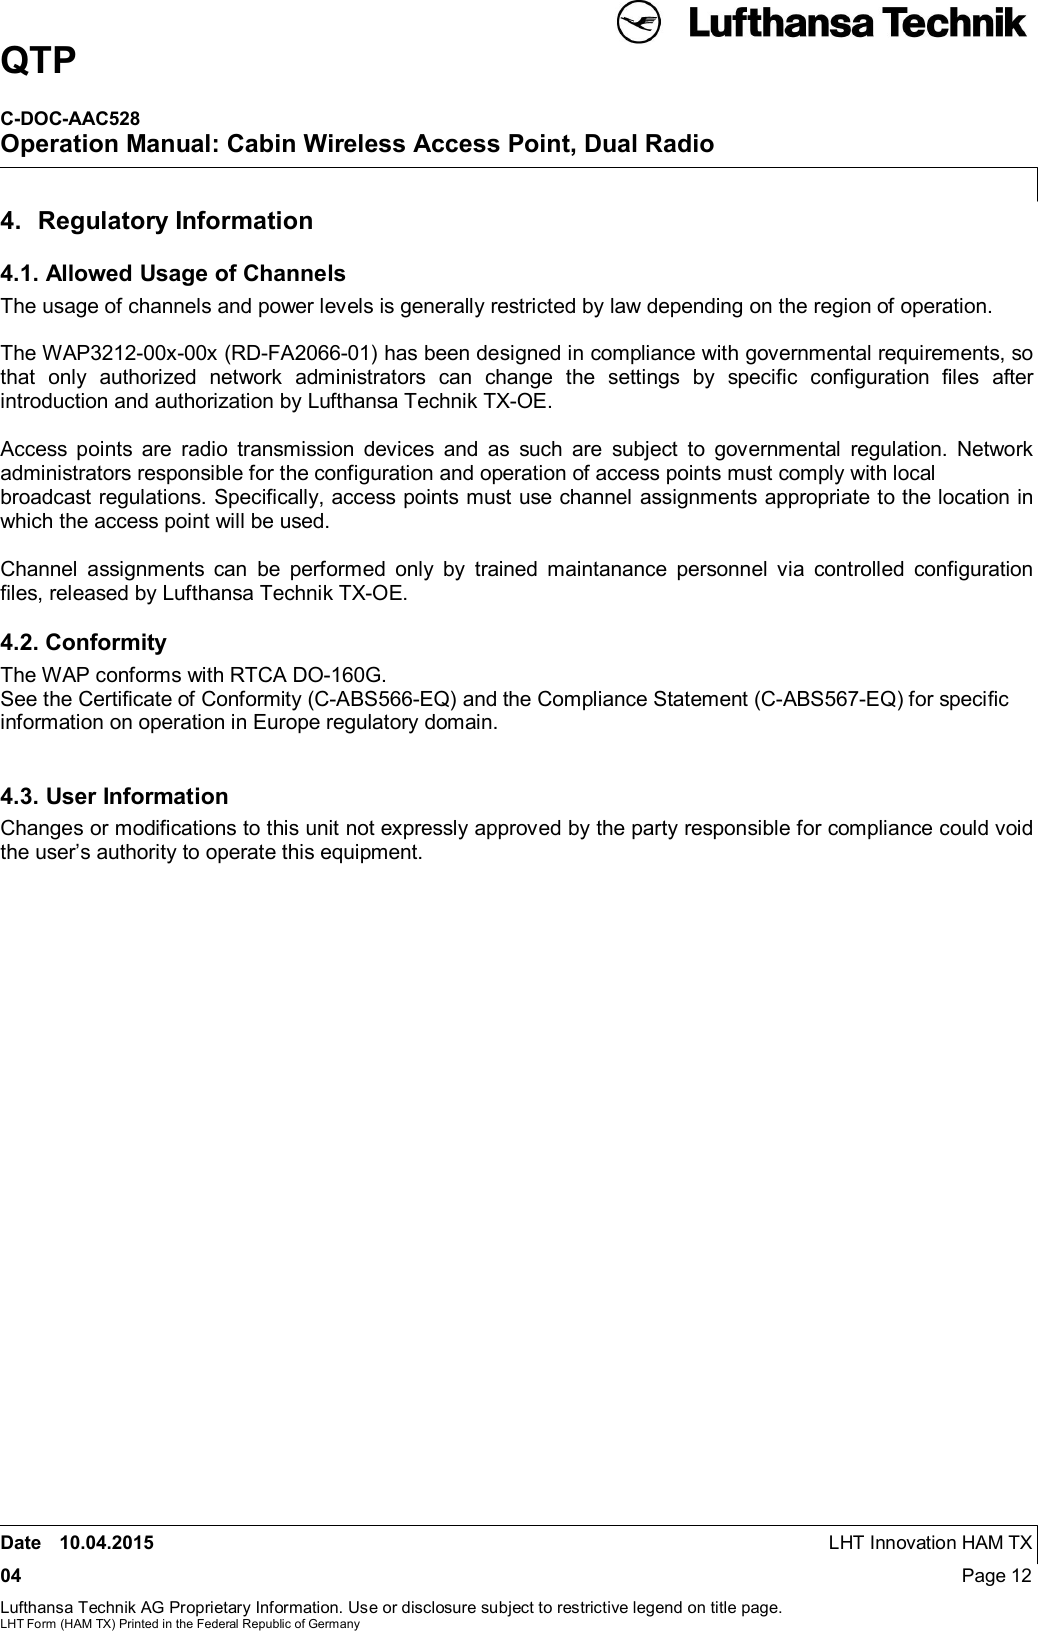 QTPC-DOC-AAC528Operation Manual: Cabin Wireless Access Point, Dual RadioDate 10.04.2015 LHT Innovation HAM TX04 Page 12Lufthansa Technik AG Proprietary Information. Use or disclosure subject to restrictive legend on title page.LHT Form (HAM TX) Printed in the Federal Republic of Germany4.  Regulatory Information4.1. Allowed Usage of ChannelsThe usage of channels and power levels is generally restricted by law depending on the region of operation.The WAP3212-00x-00x (RD-FA2066-01) has been designed in compliance with governmental requirements, sothat only authorized network administrators can change the settings by specific configuration files afterintroduction and authorization by Lufthansa Technik TX-OE.Access points are radio transmission devices and as such are subject to governmental regulation. Networkadministrators responsible for the configuration and operation of access points must comply with localbroadcast regulations. Specifically, access points must use channel assignments appropriate to the location inwhich the access point will be used.Channel assignments can be performed only by trained maintanance personnel via controlled configurationfiles, released by Lufthansa Technik TX-OE.4.2. ConformityThe WAP conforms with RTCA DO-160G.See the Certiﬁcate of Conformity (C-ABS566-EQ) and the Compliance Statement (C-ABS567-EQ) for speciﬁcinformation on operation in Europe regulatory domain.4.3. User InformationChanges or modifications to this unit not expressly approved by the party responsible for compliance could voidthe user’s authority to operate this equipment.